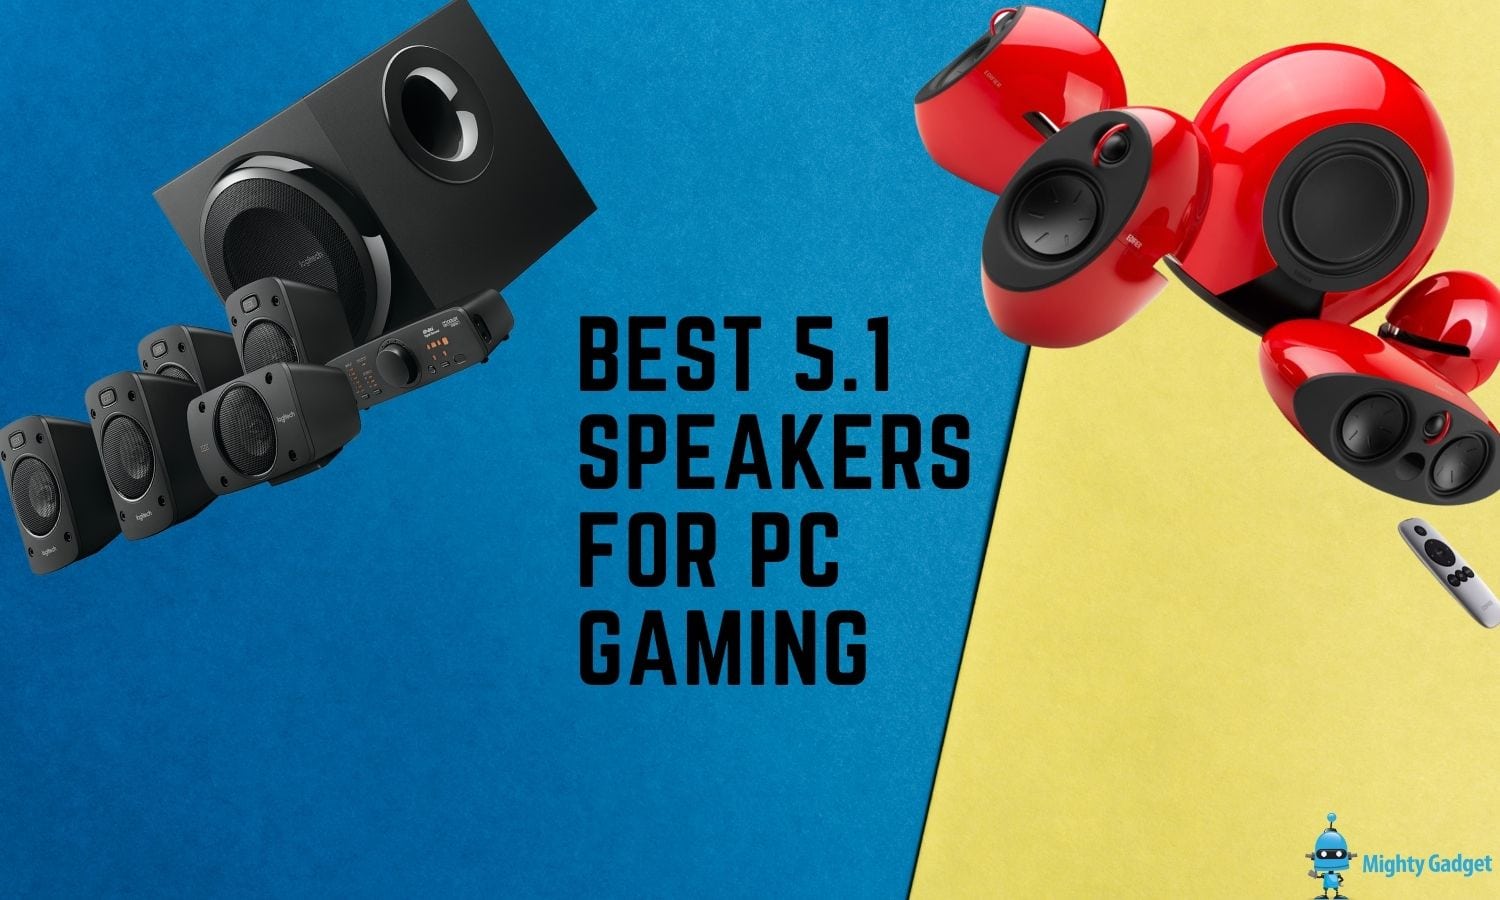 Best 5.1 Speakers for PC Gaming in 2021 – Slim pickings means a home theatre soundbar or receiver may be better